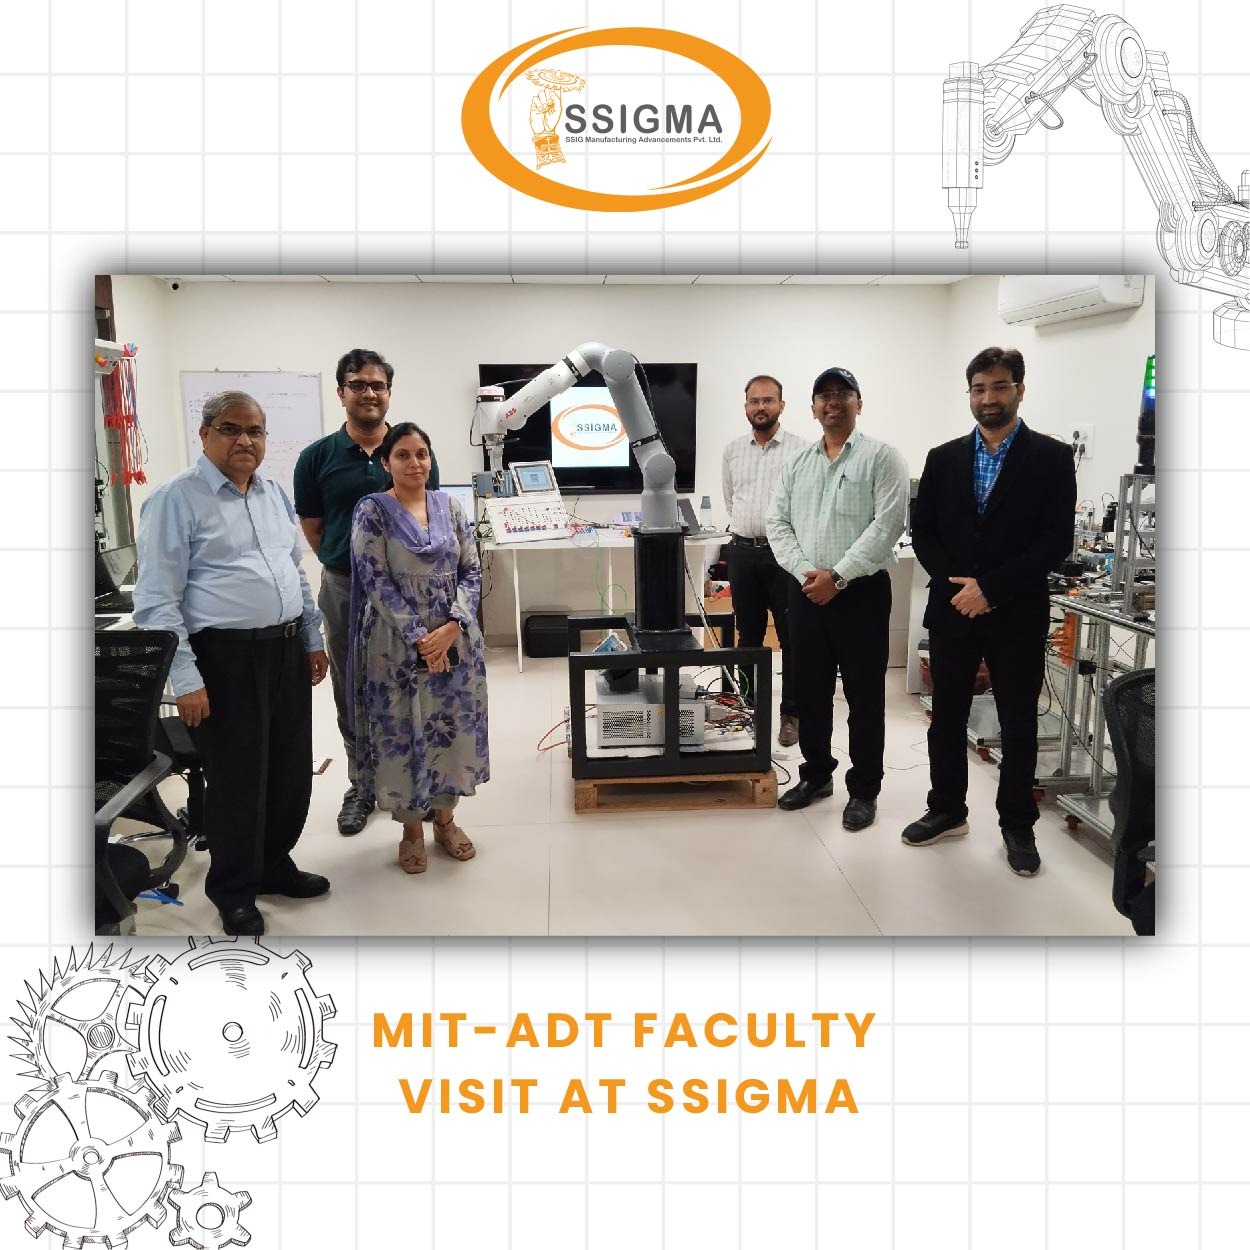 mit-adt-faculty-visit-at-ssigma